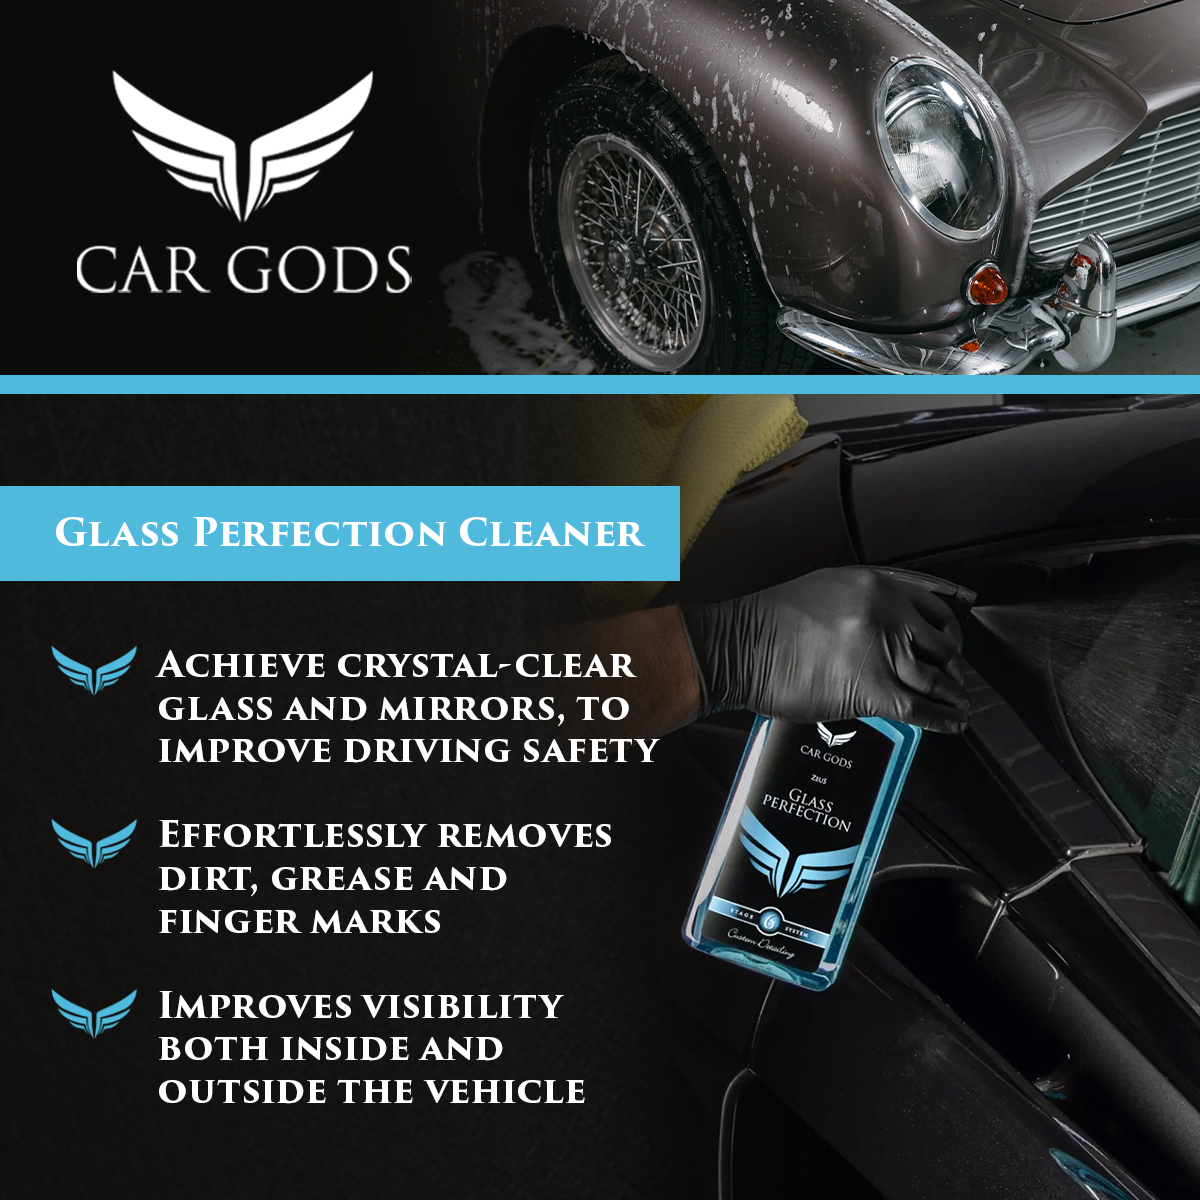 Car Gods Glass Perfection. High performance glass cleaner helps you effortlessly remove dirt, grease, grime and finger marks from your car’s glass. The quick-drying, solvent-free formula ensures a streak free finish, improving visibility both inside and outside the vehicle to improve driving safety.